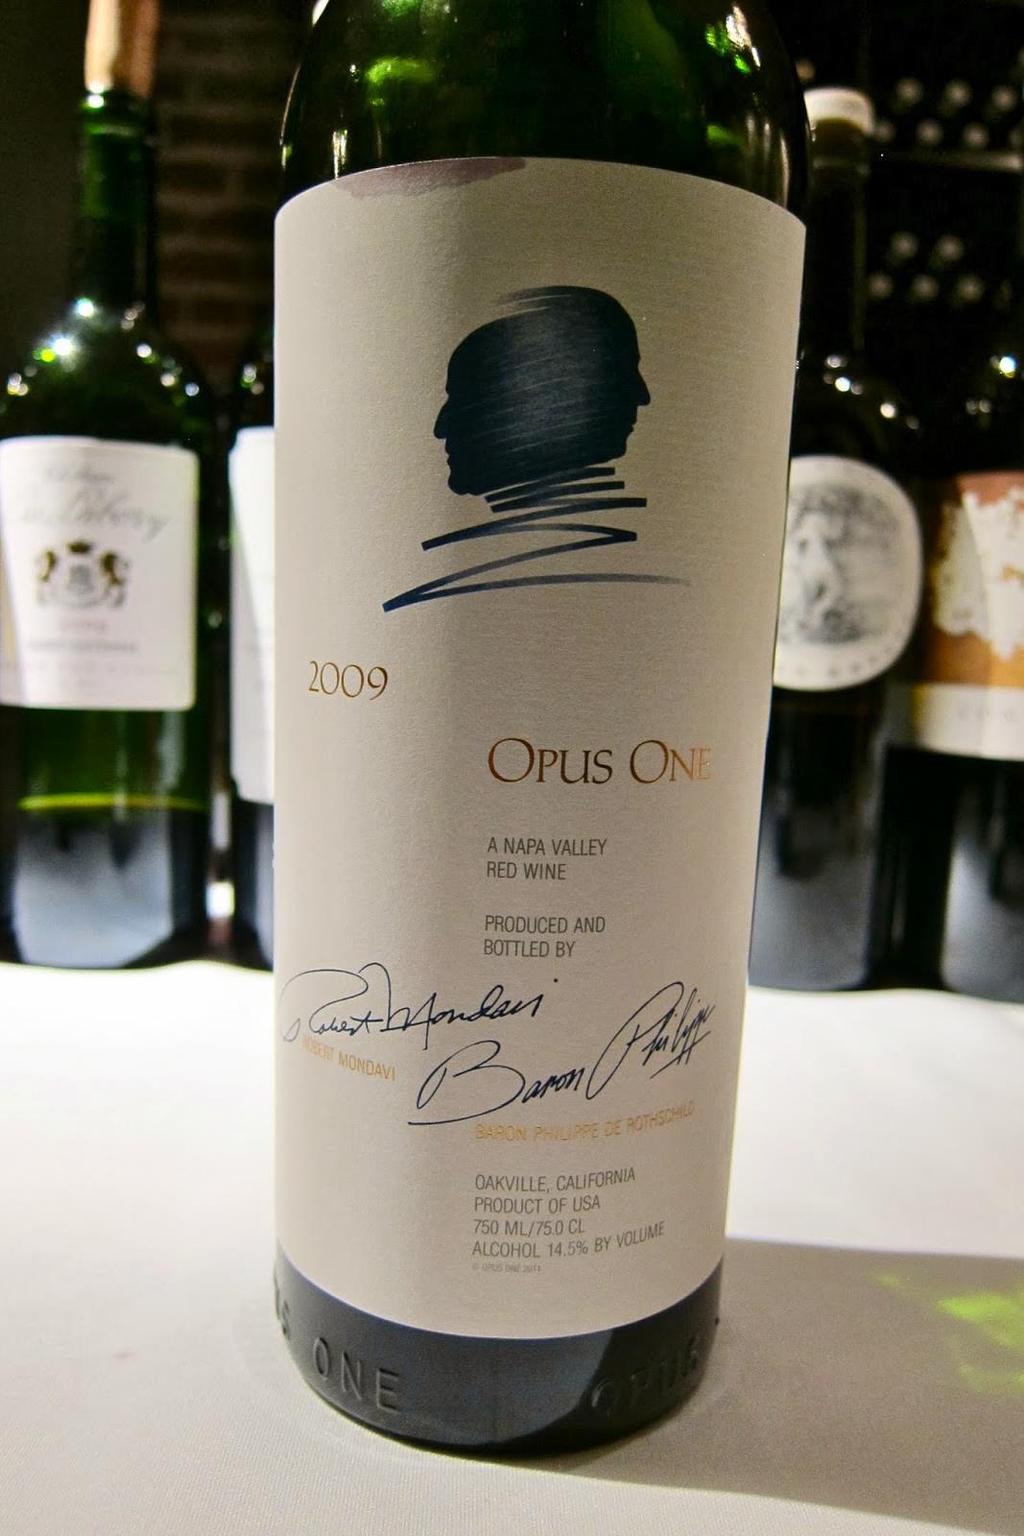 OPUS ONE 2009 Aromas: Black olive and minerals underlie more traditional notes of dark chocolate, cola and espresso.